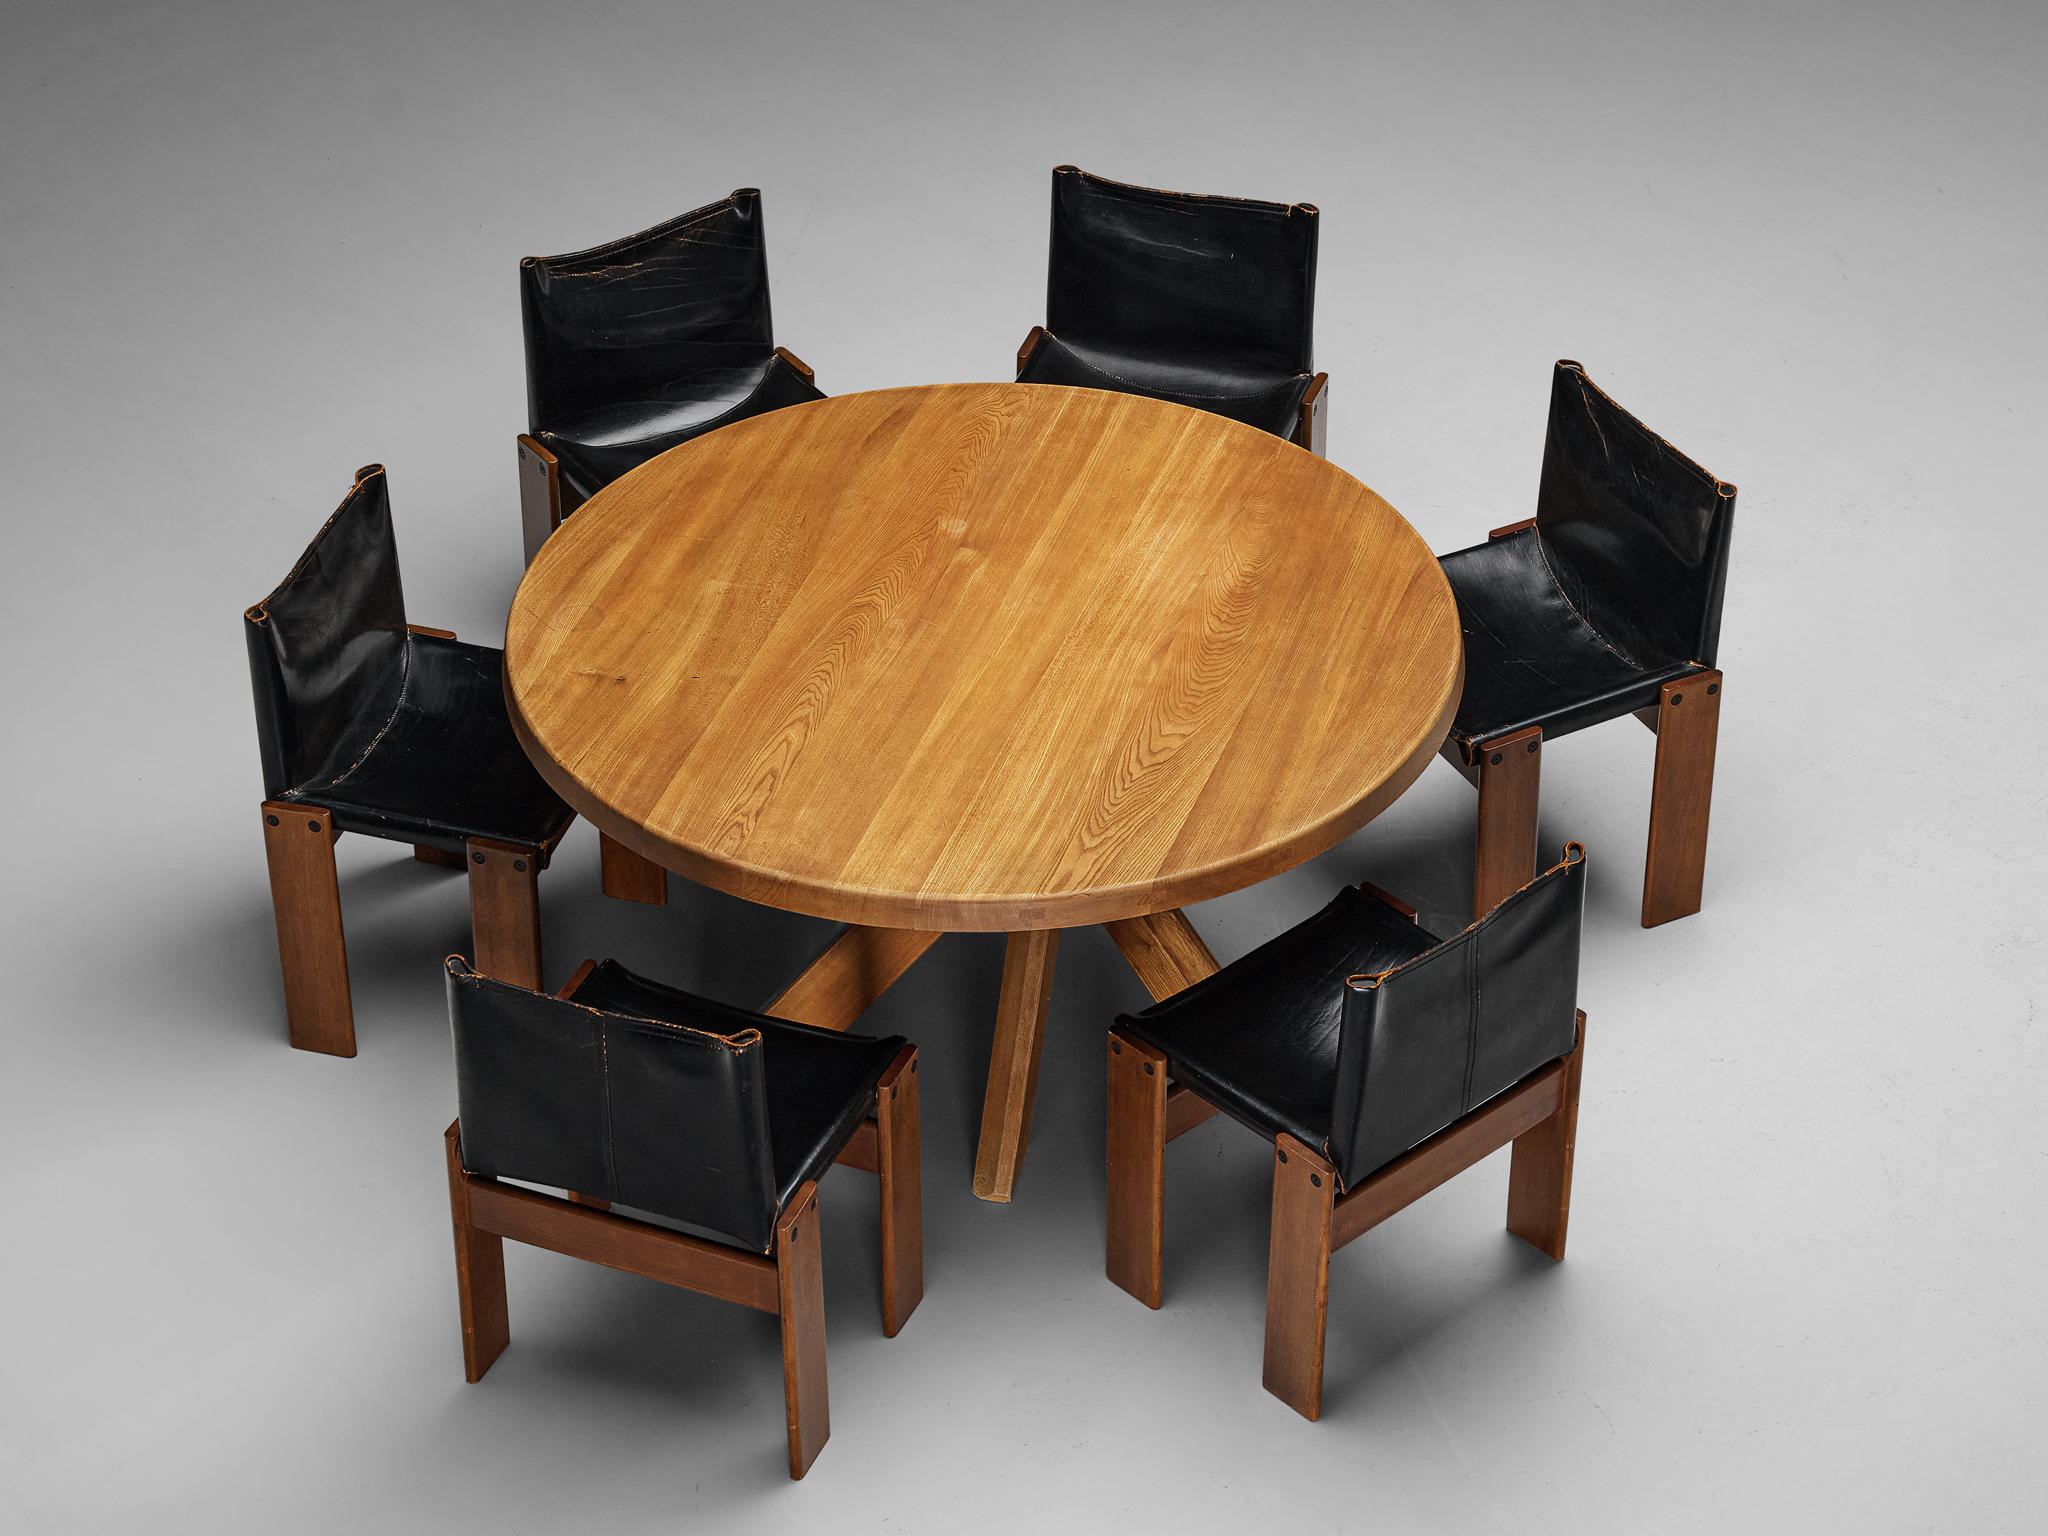 Dining set with Pierre Chapo T21D dining table paired with Afra and Tobia Scarpa Monk chairs. 


Pierre Chapo, dining table, model 'T21D', solid elm, France, 1970s

This table is one of the early editions designed by Pierre Chapo, known for his